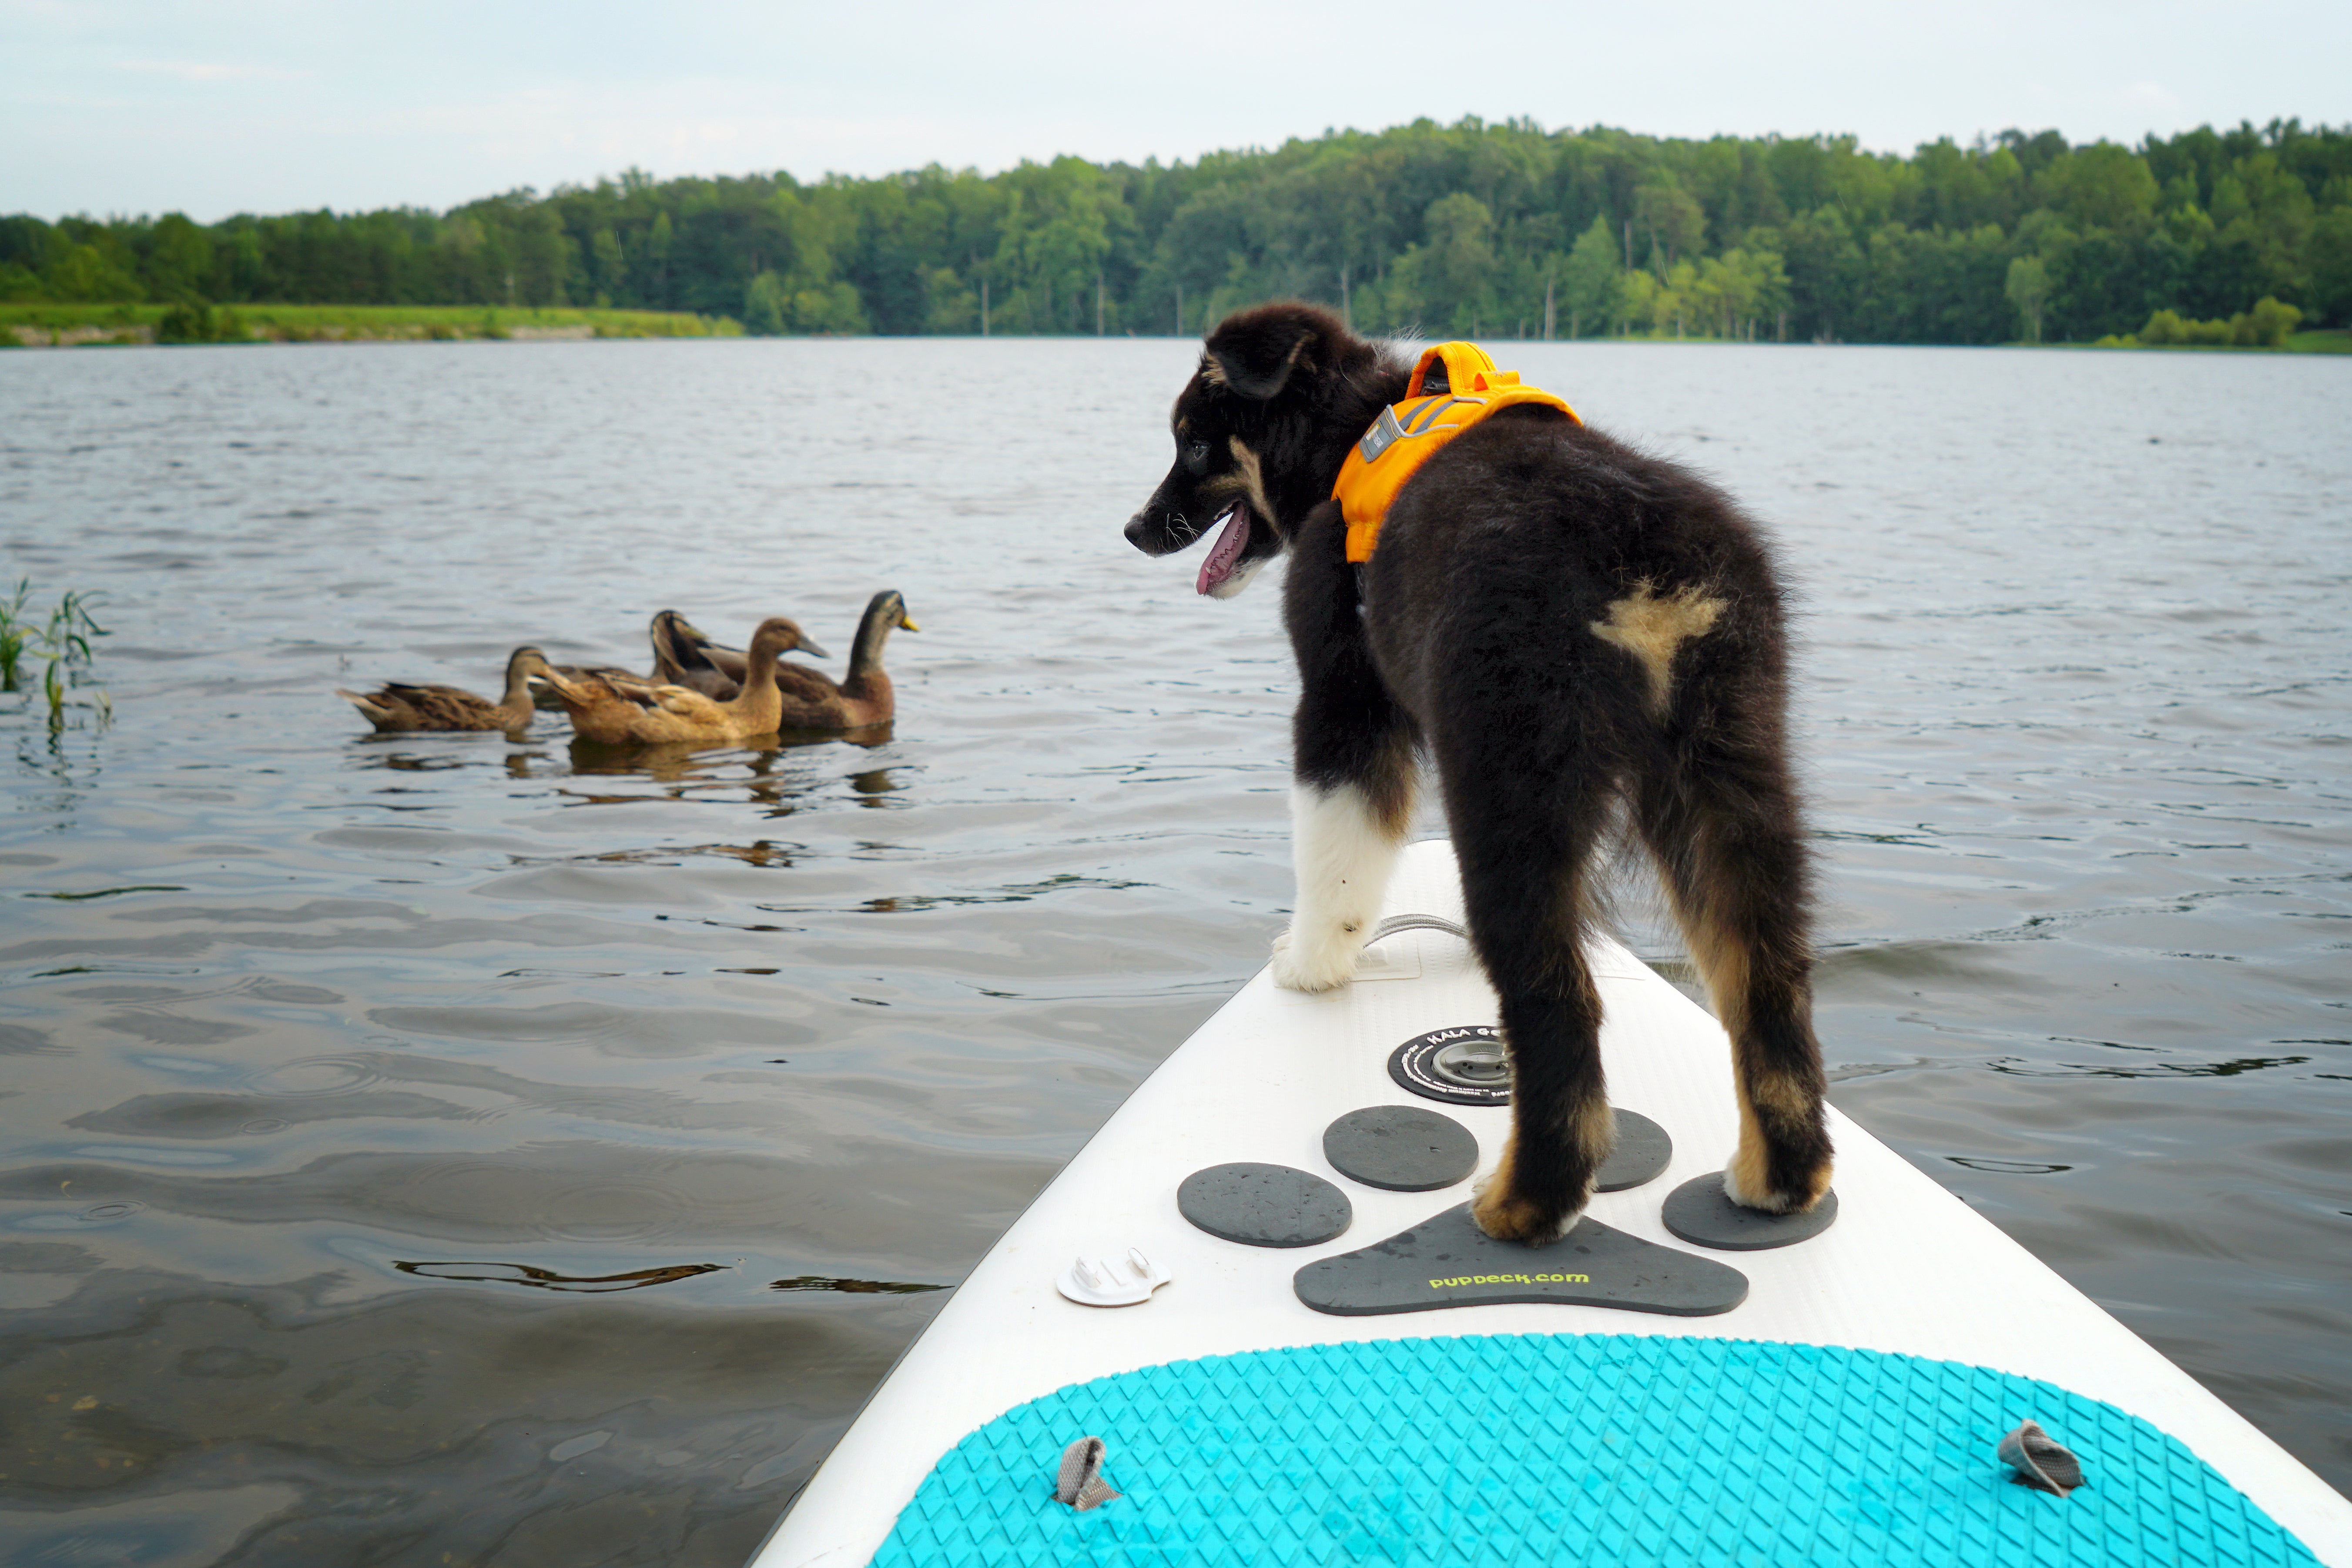 Willow stands on front of paddleboard wearing Float Coat.